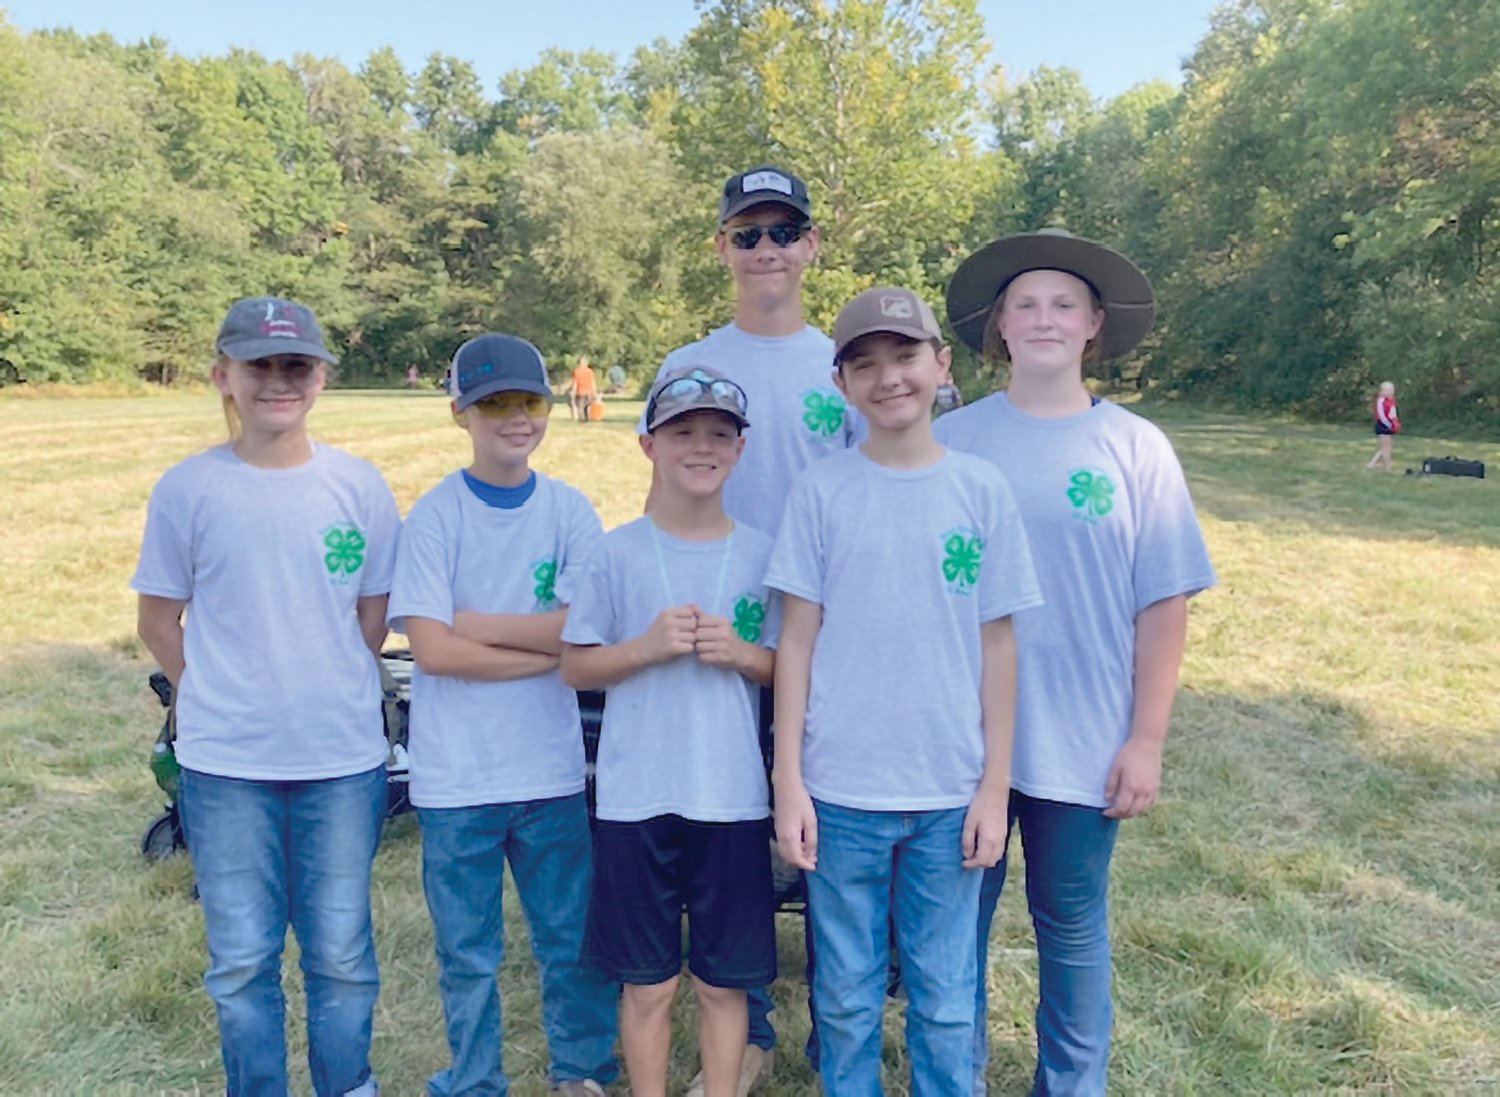 Several local shooters had success in the .22 competition. Locals shown include, front row: Kataryna Davis (first place, junior), Kit Benne, Easton Hinkle and Tyler Kelly.  Back row: Warren Hinkle (fourth place, intermediate) and Shiane Parish (10th place, intermediate). Not pictured: Tucker Richardson and Sean Boone. Davis was first place in the junior division at the state smallbore .22 competition.